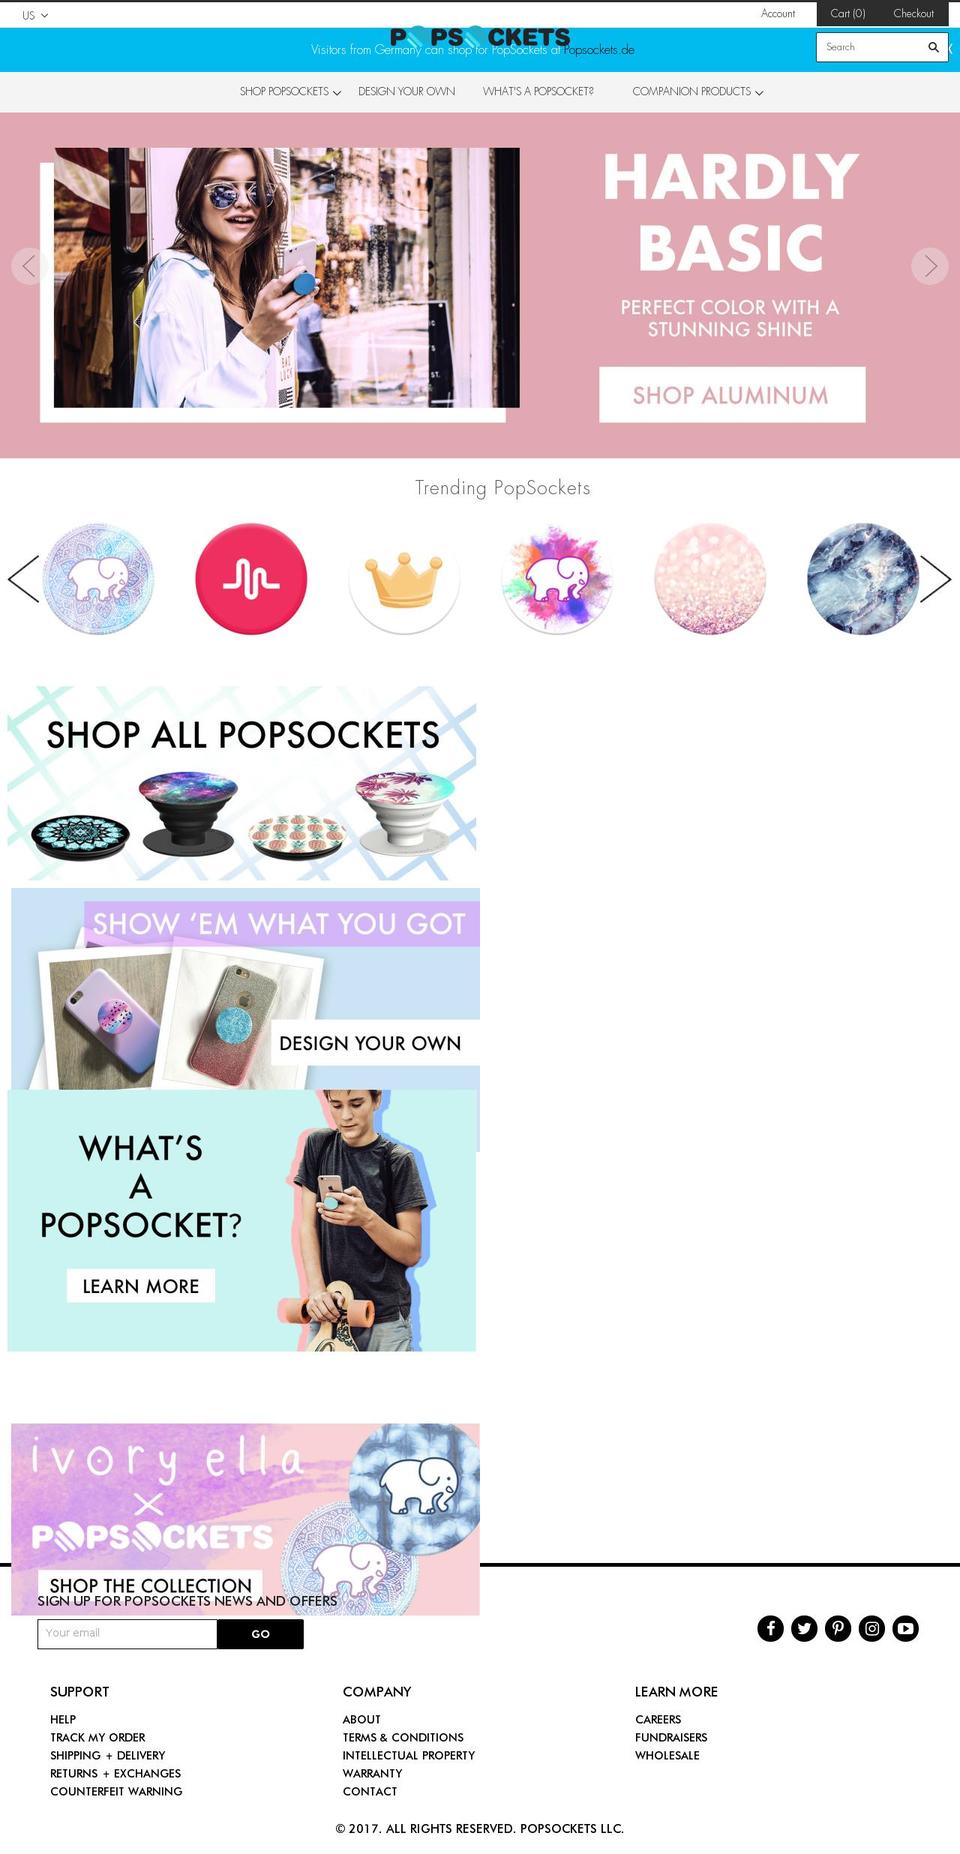 Tracking Number - Theme Production 2017-03-15 Shopify theme site example popsocket.com